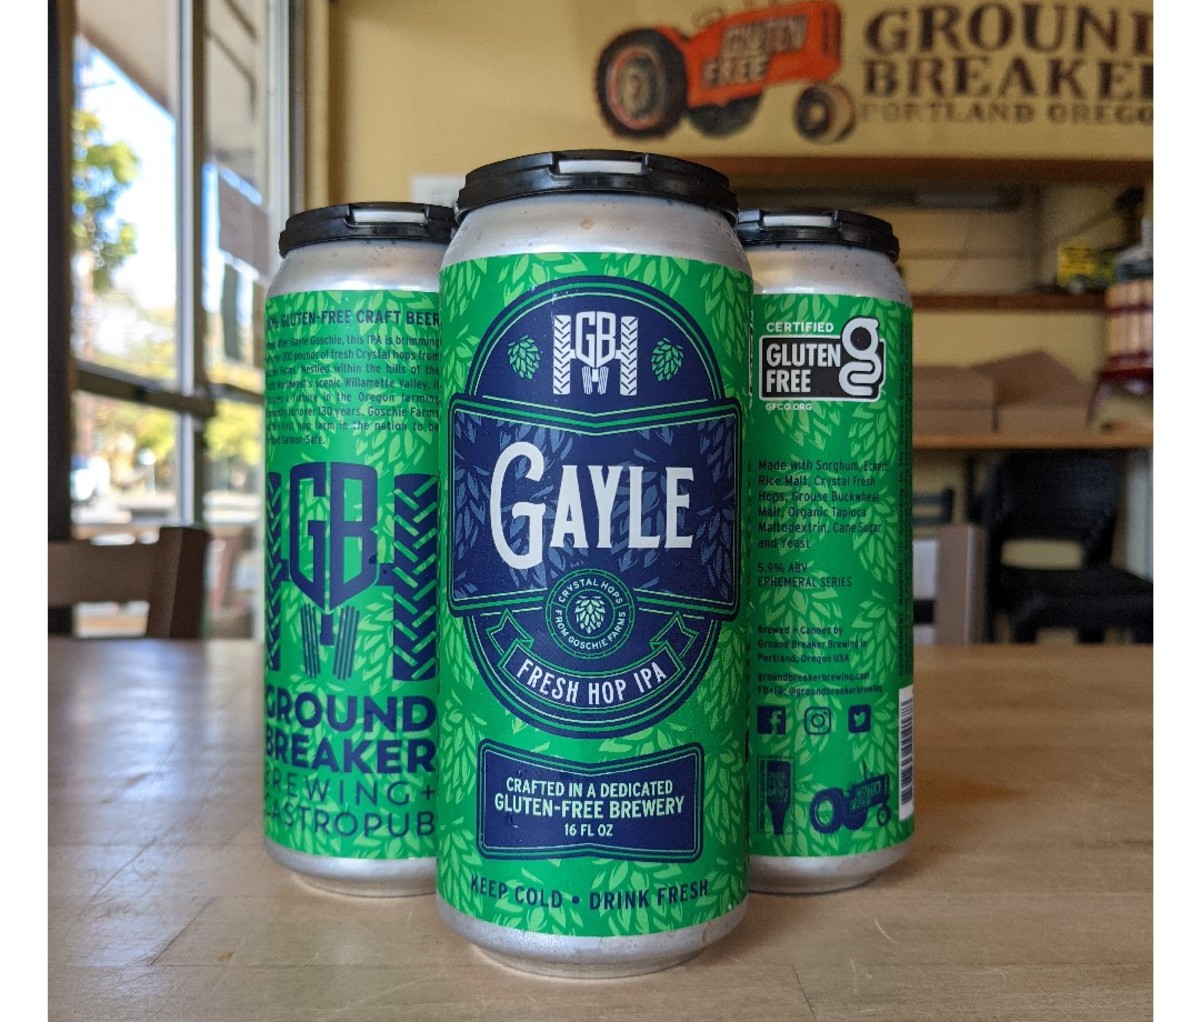 Three can of Ground Breaker Brewing Gayle Fresh Hop IPA on a table